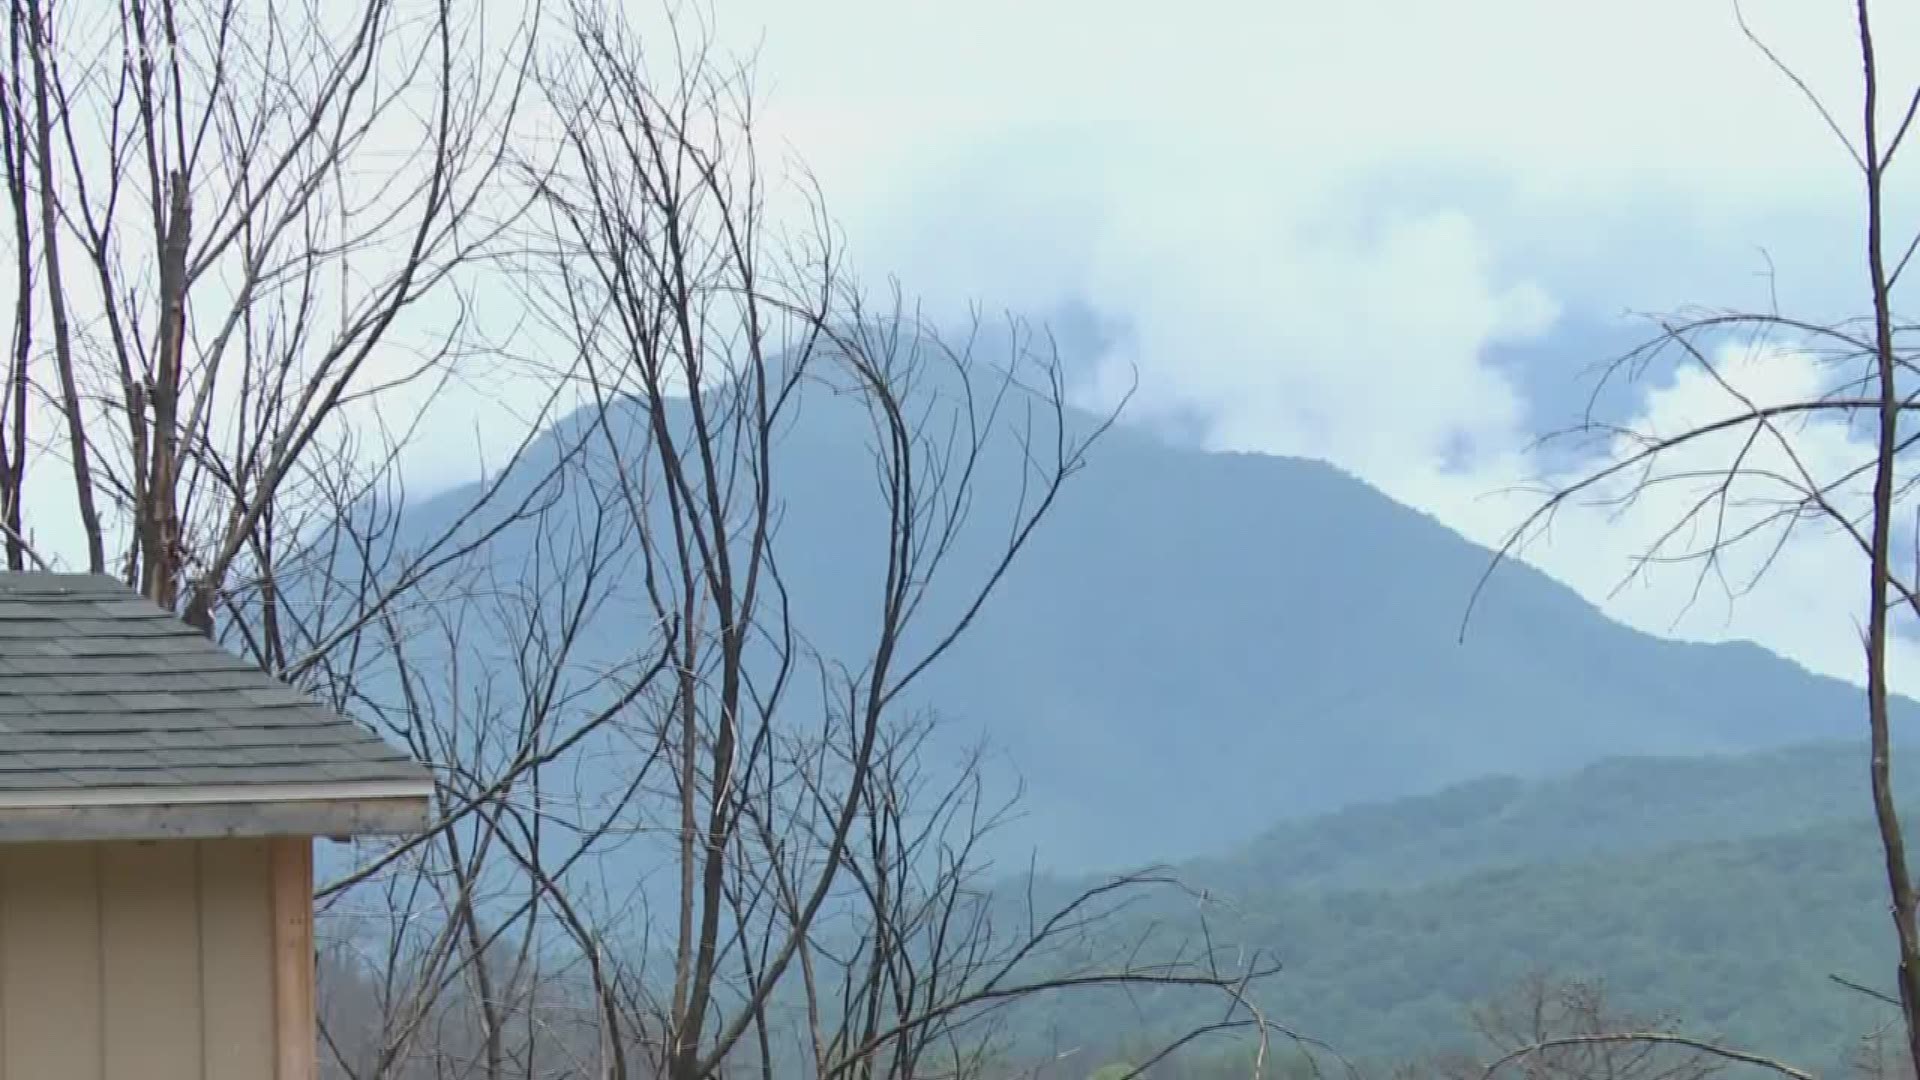 Gatlinburg and Sevier County are entering the next phase of recovery following the 2016 wildfires.